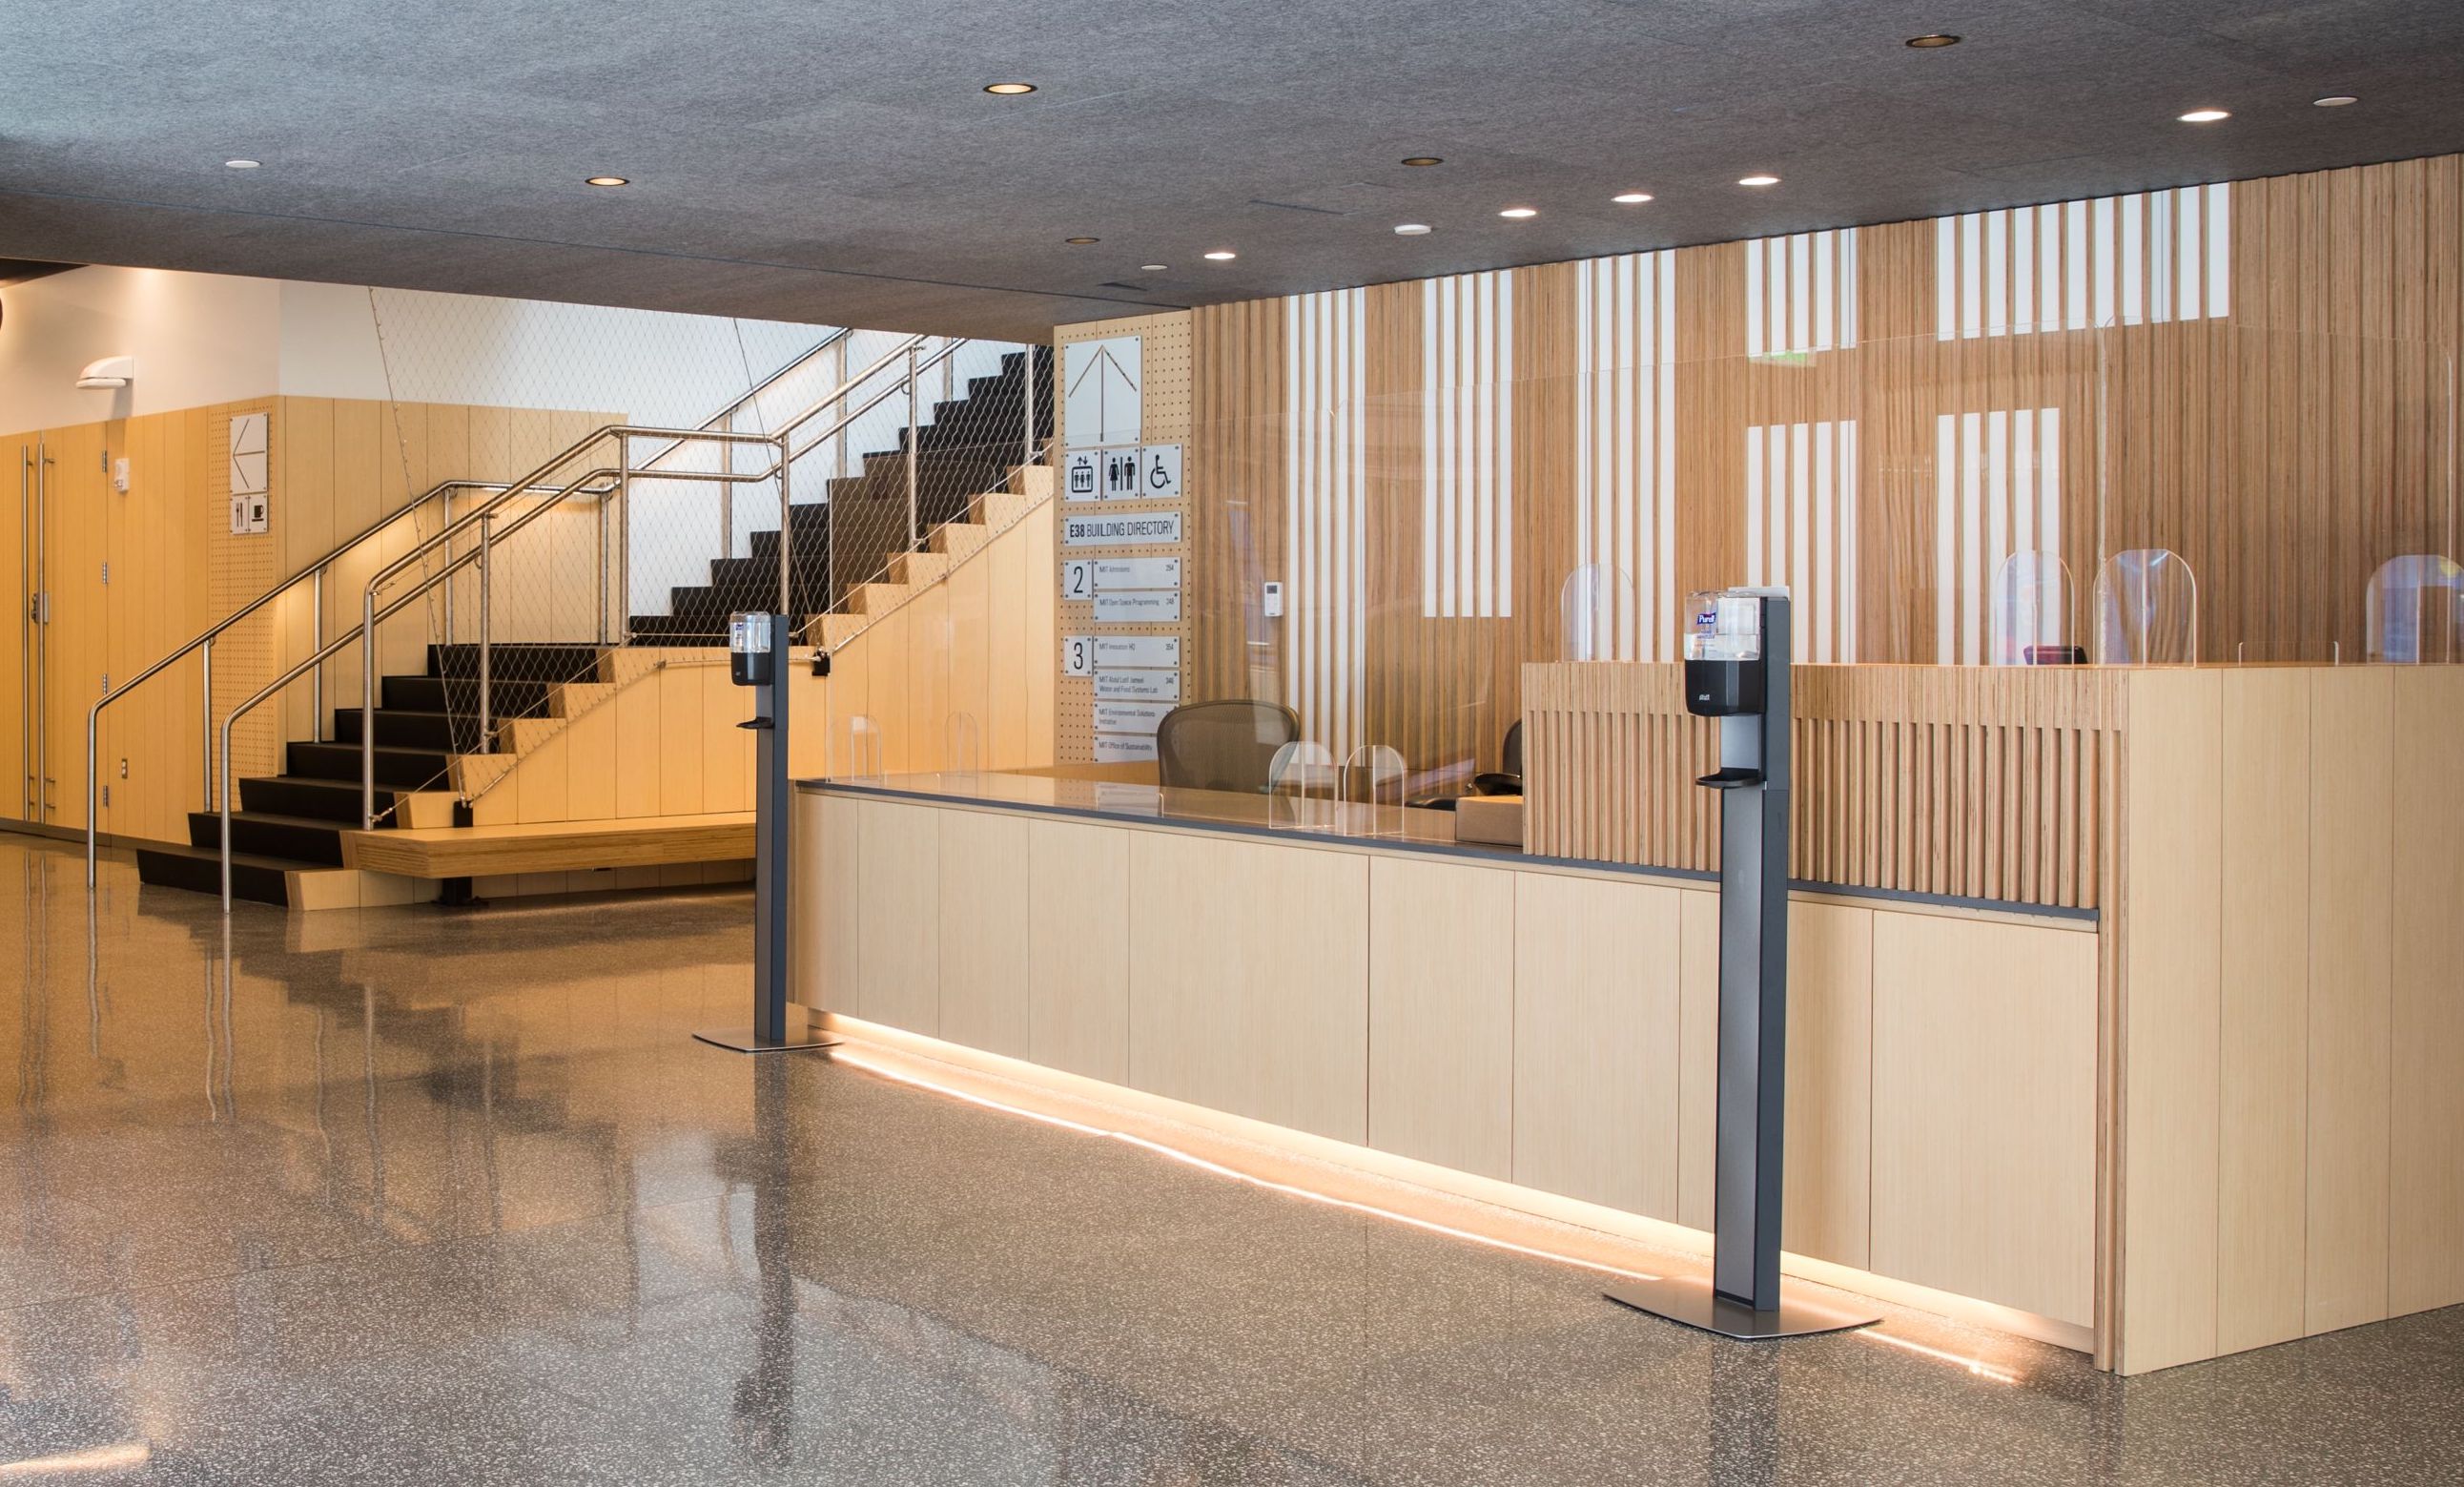 Front desk of the MIT Welcome Center. There is a large MIT logo on the back wall.